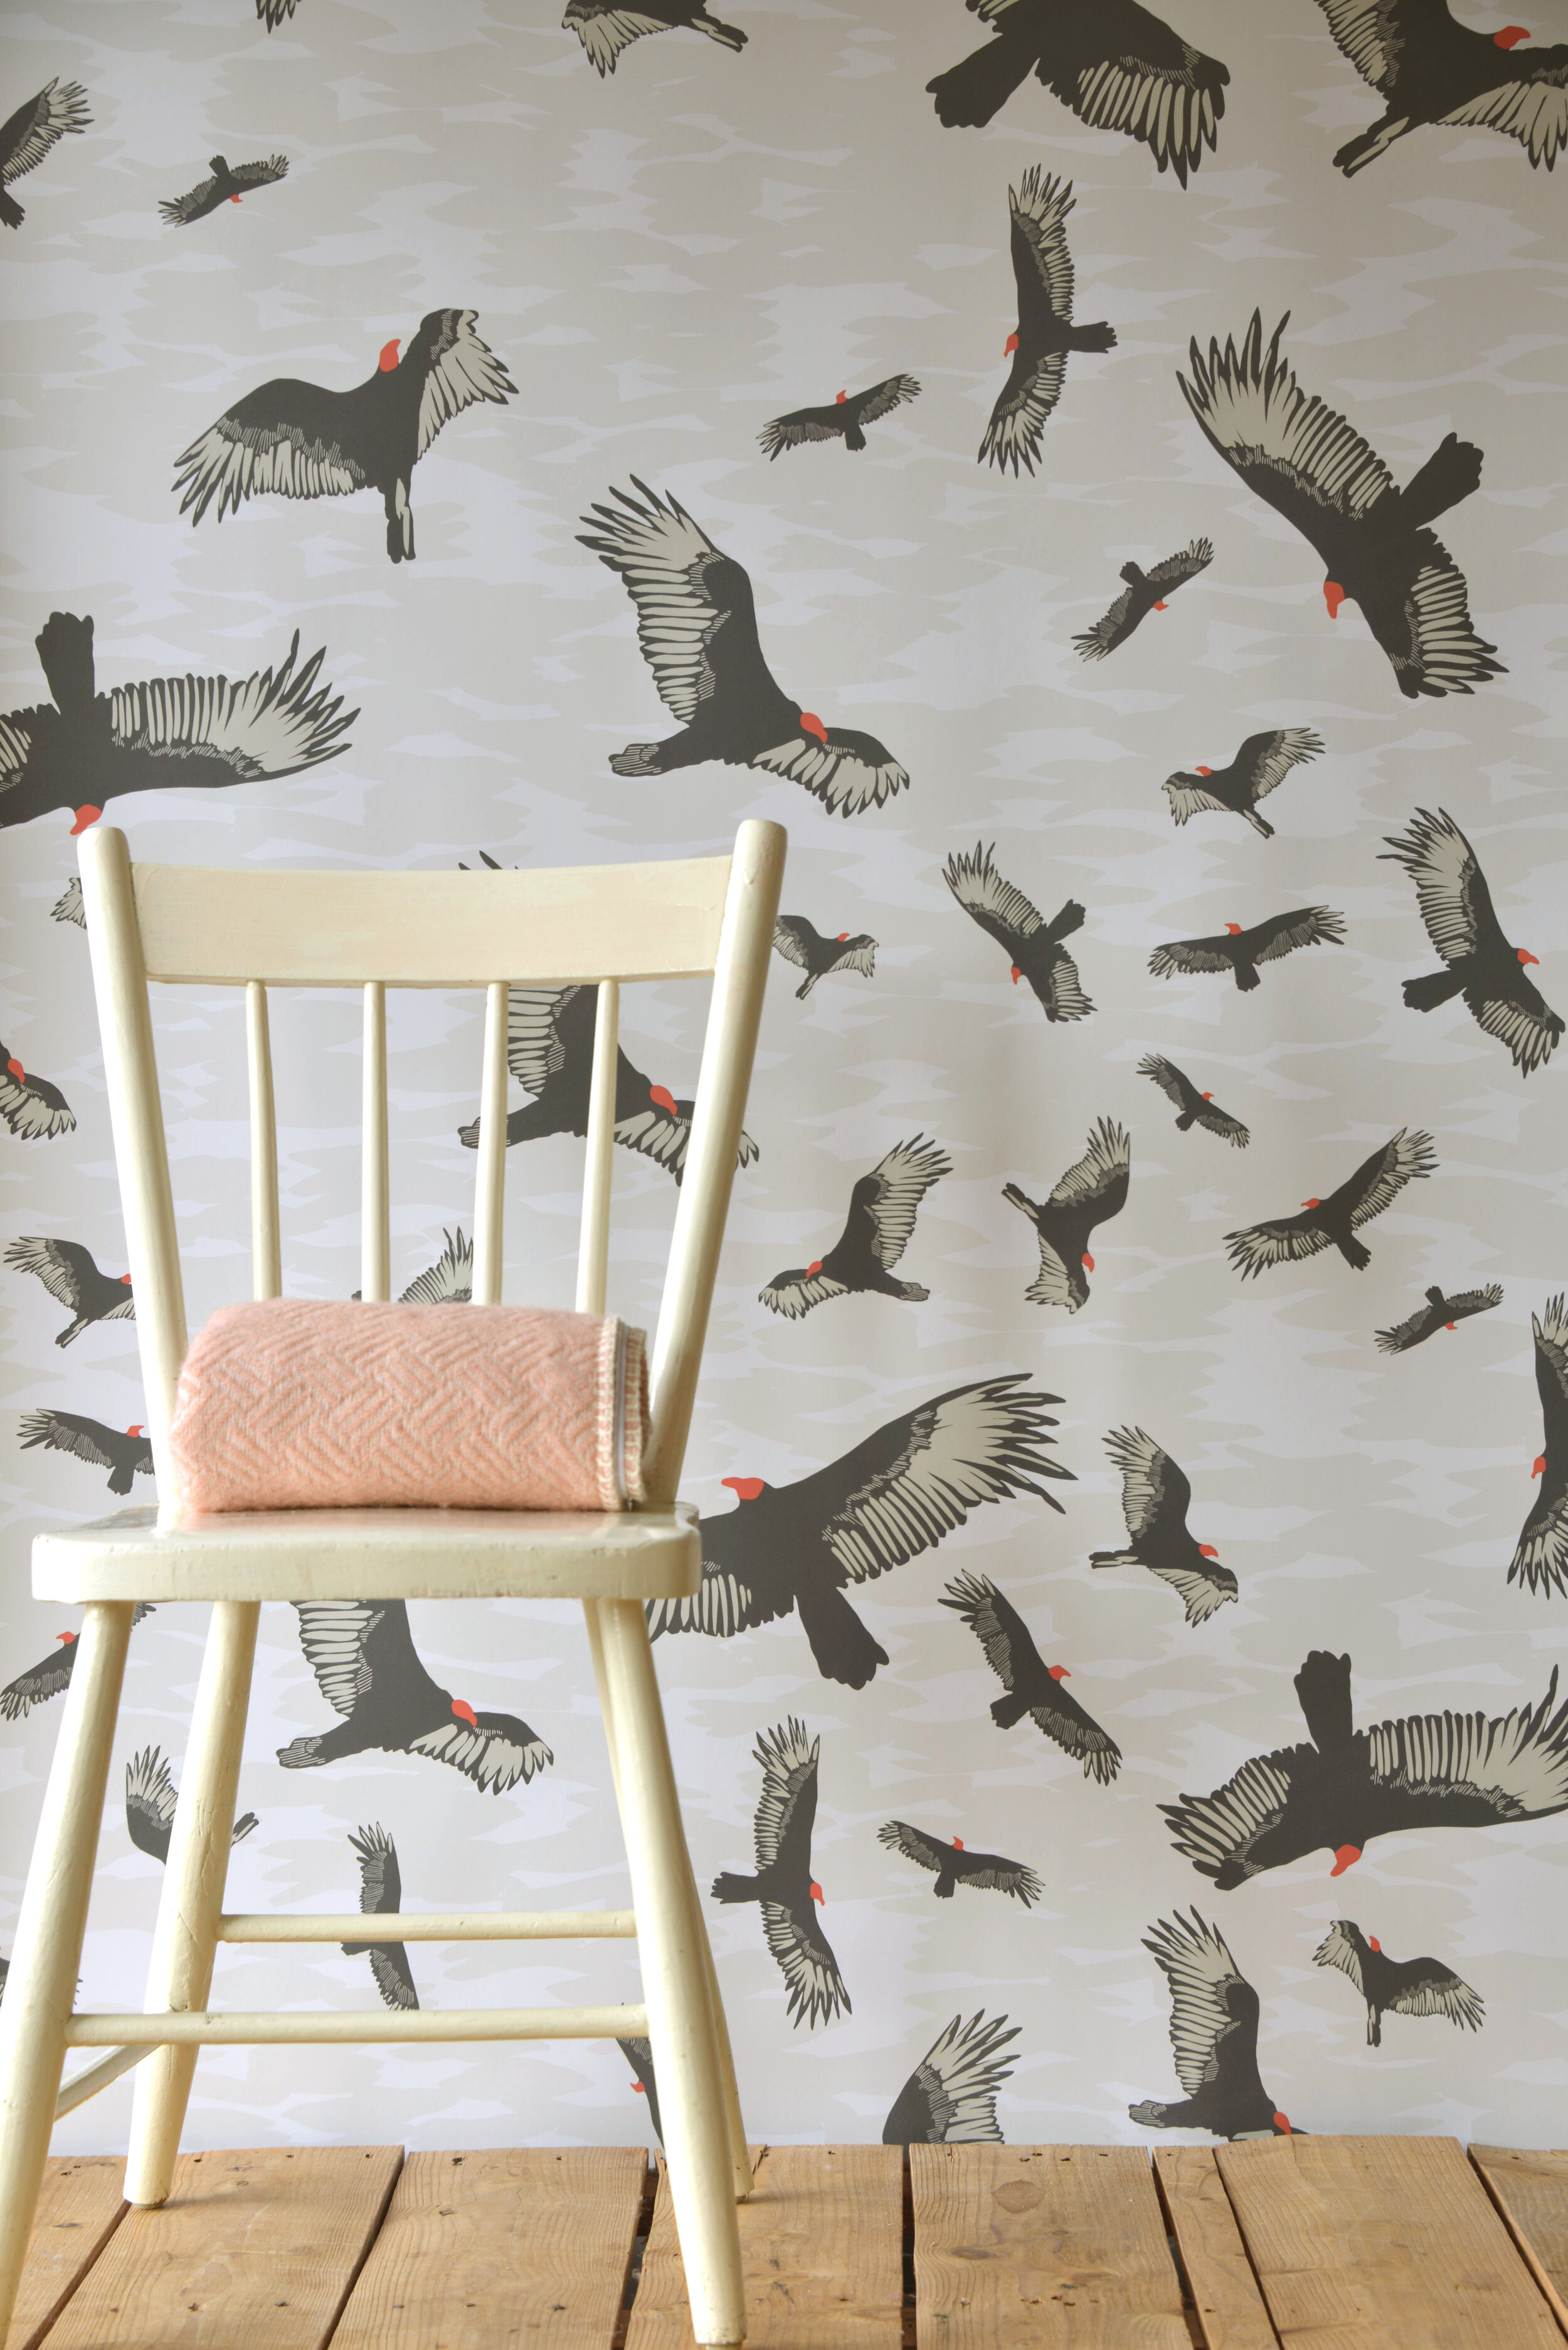 Kate Golding Turkey Vulture wallpaper // Modern wallcoverings and interior decor.